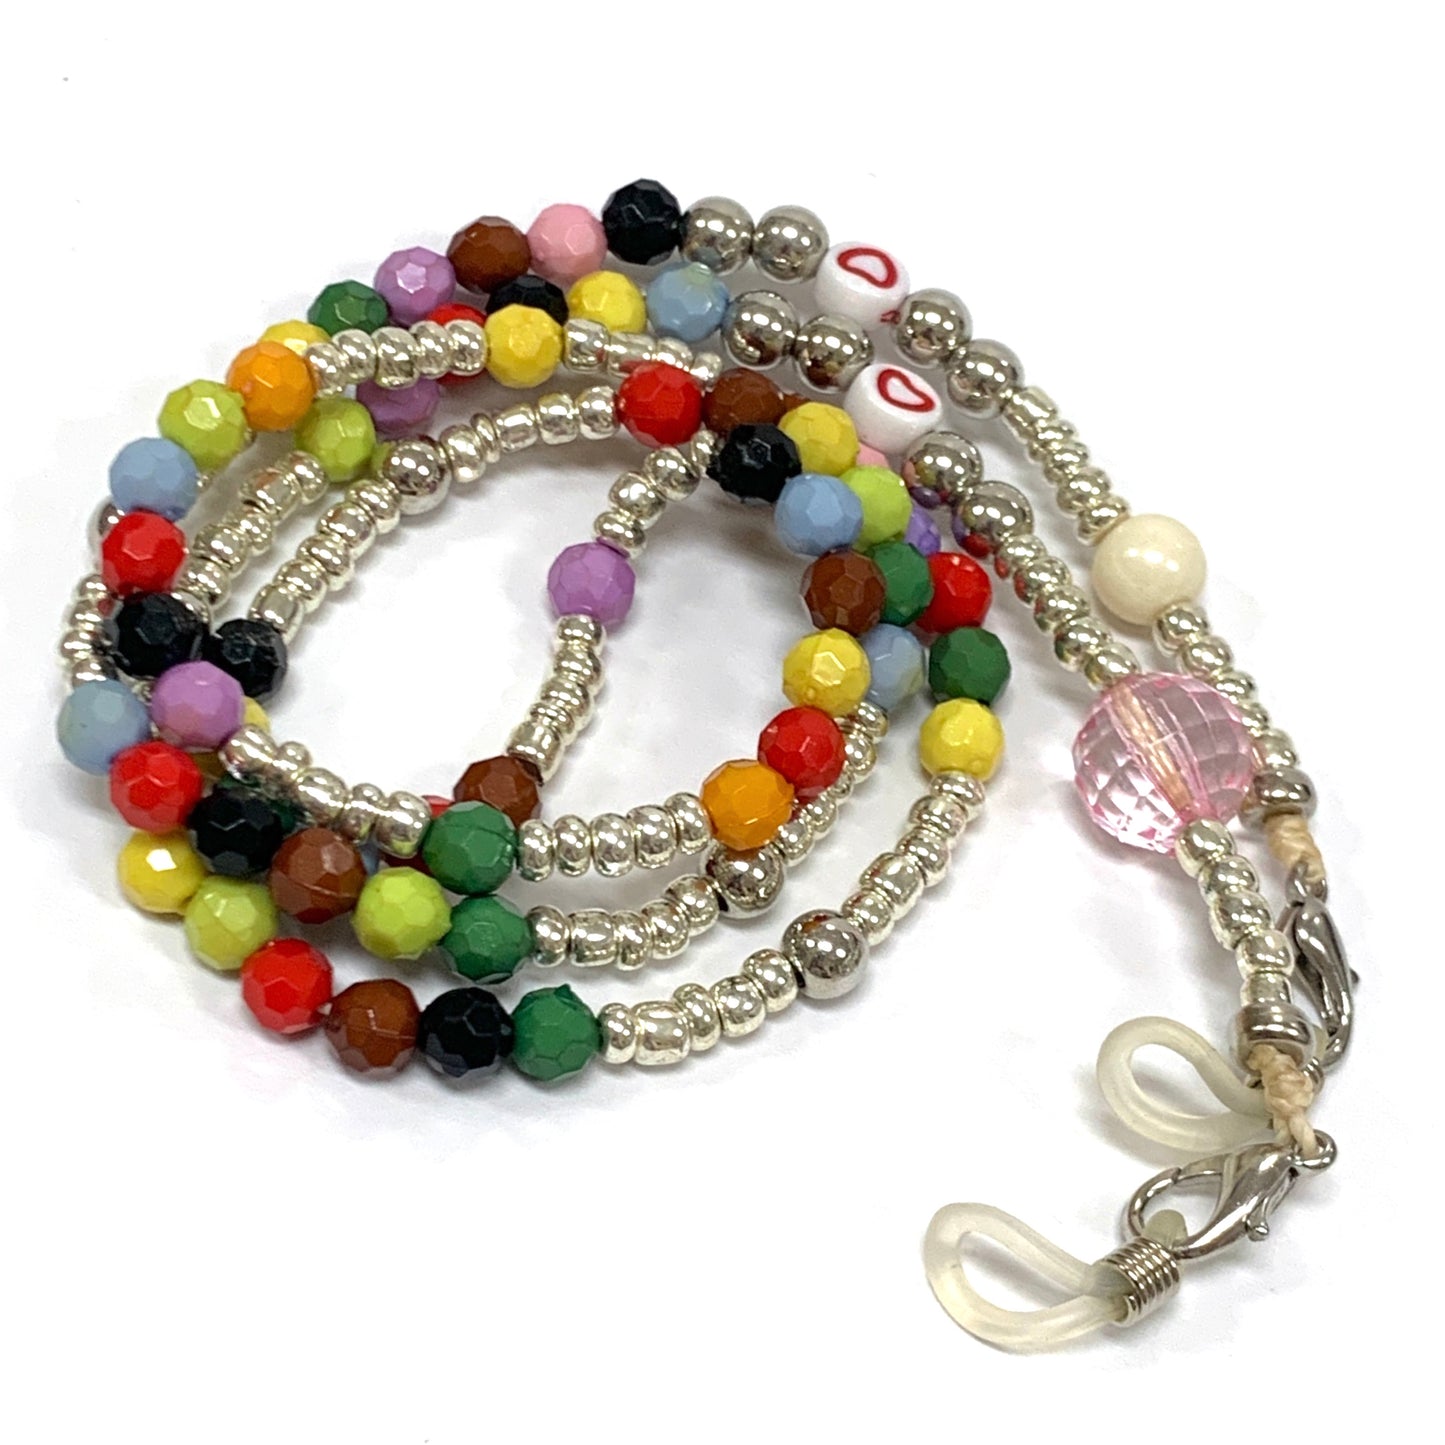 Necklace Chain Lanyard of Assorted Colors